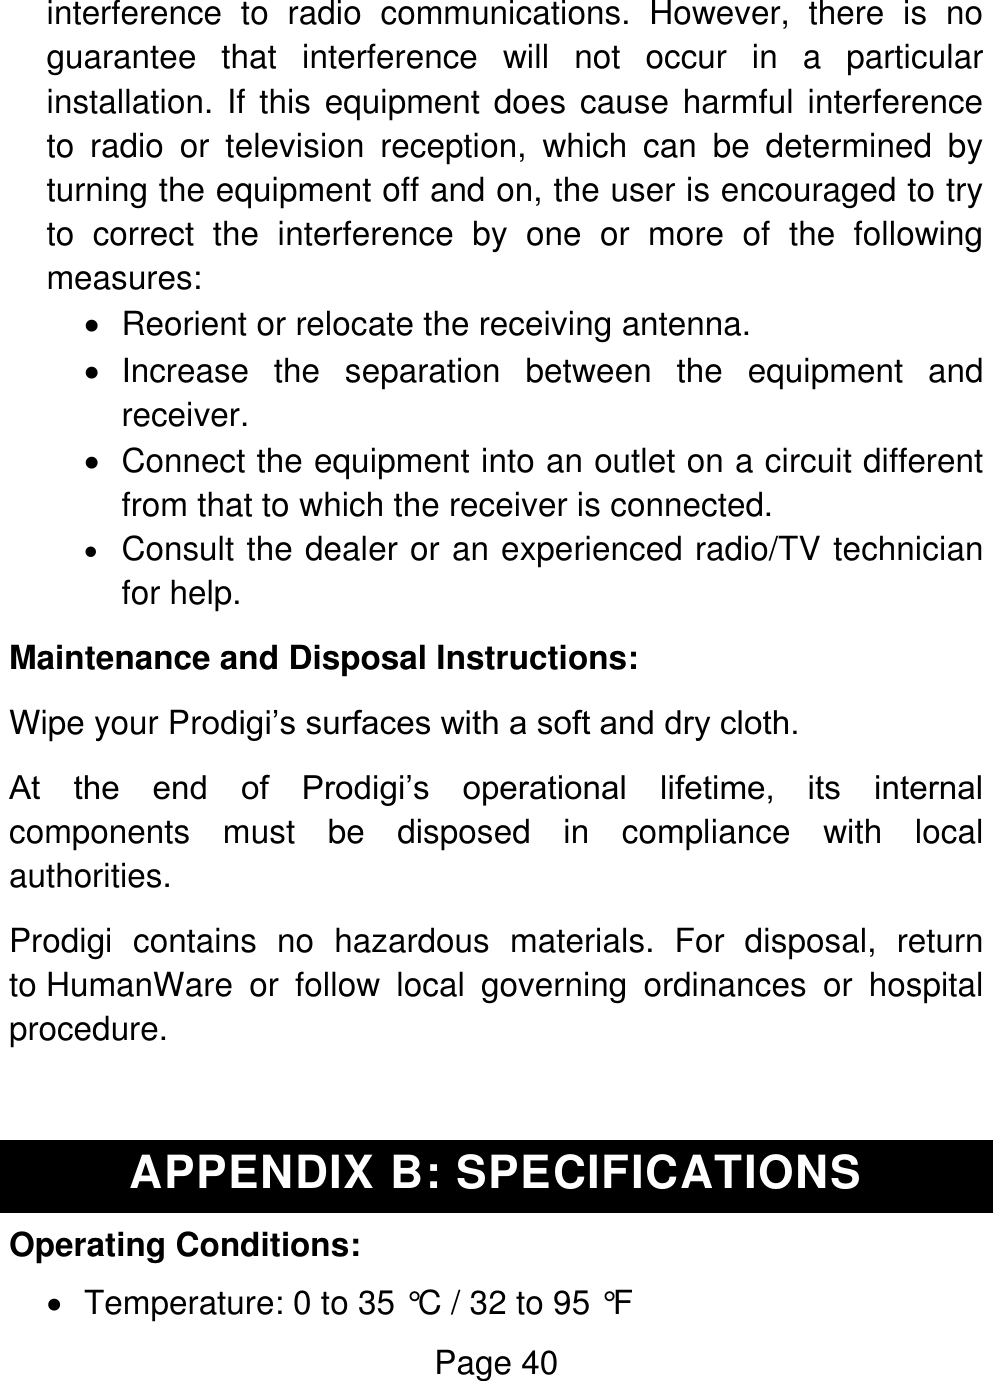 Page 40  interference  to  radio  communications.  However,  there  is  no guarantee  that  interference  will  not  occur  in  a  particular installation. If this equipment does cause harmful interference to  radio  or  television  reception,  which  can  be  determined  by turning the equipment off and on, the user is encouraged to try to  correct  the  interference  by  one  or  more  of  the  following measures:   Reorient or relocate the receiving antenna.   Increase  the  separation  between  the  equipment  and receiver.   Connect the equipment into an outlet on a circuit different from that to which the receiver is connected.  Consult the dealer or an experienced radio/TV technician for help. Maintenance and Disposal Instructions: Wipe your Prodigi’s surfaces with a soft and dry cloth. At  the  end  of  Prodigi’s  operational  lifetime,  its  internal components  must  be  disposed  in  compliance  with  local authorities. Prodigi  contains  no  hazardous  materials.  For  disposal,  return to HumanWare  or  follow  local  governing  ordinances  or  hospital procedure.  APPENDIX B: SPECIFICATIONS Operating Conditions:   Temperature: 0 to 35 °C / 32 to 95 °F 